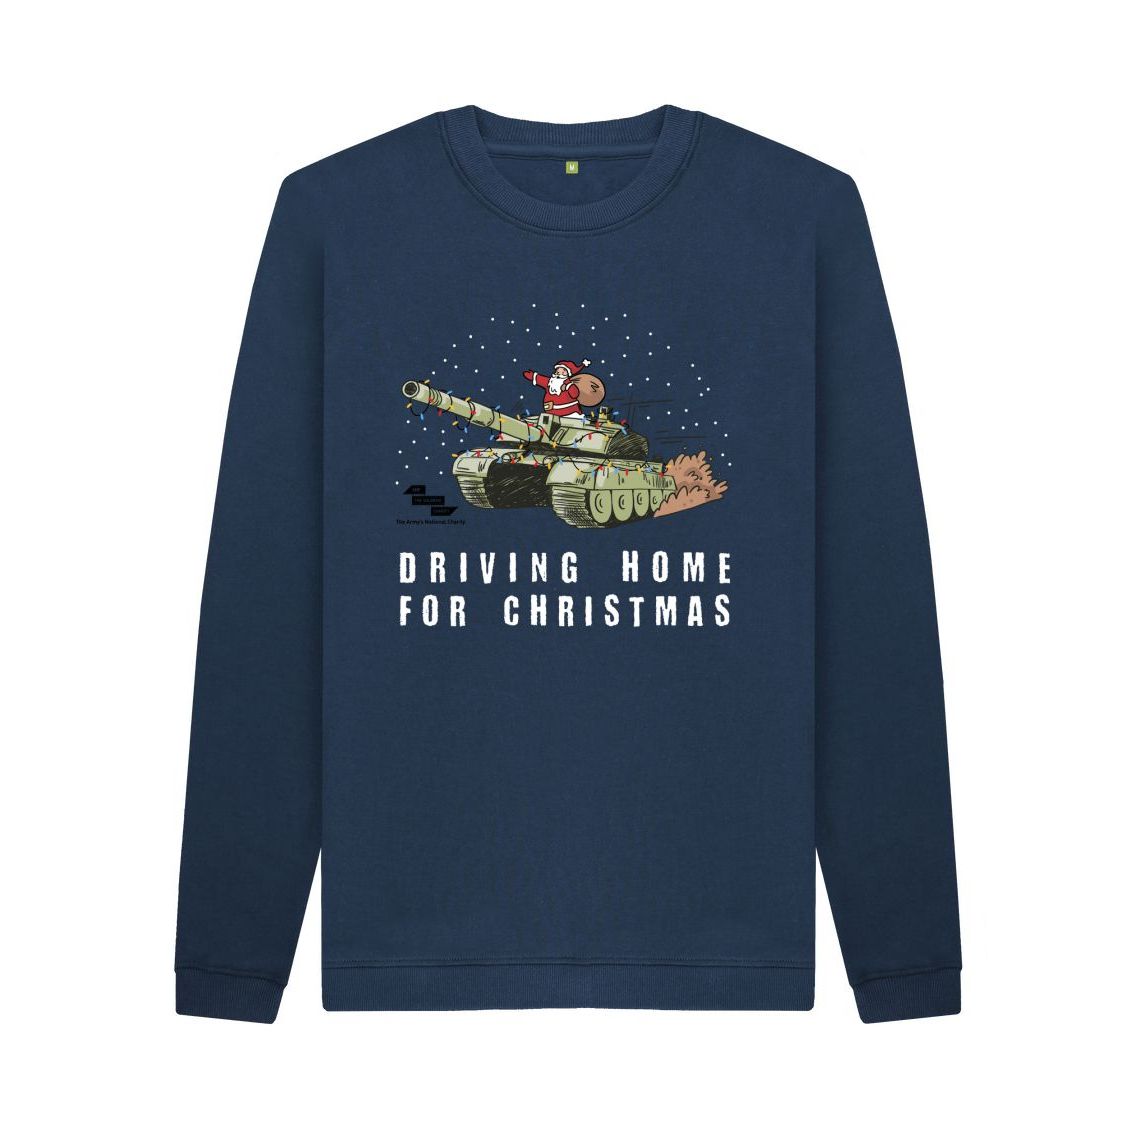 Unisex "Driving home for Christmas" jumper - ABF The Soldiers' Charity Shop